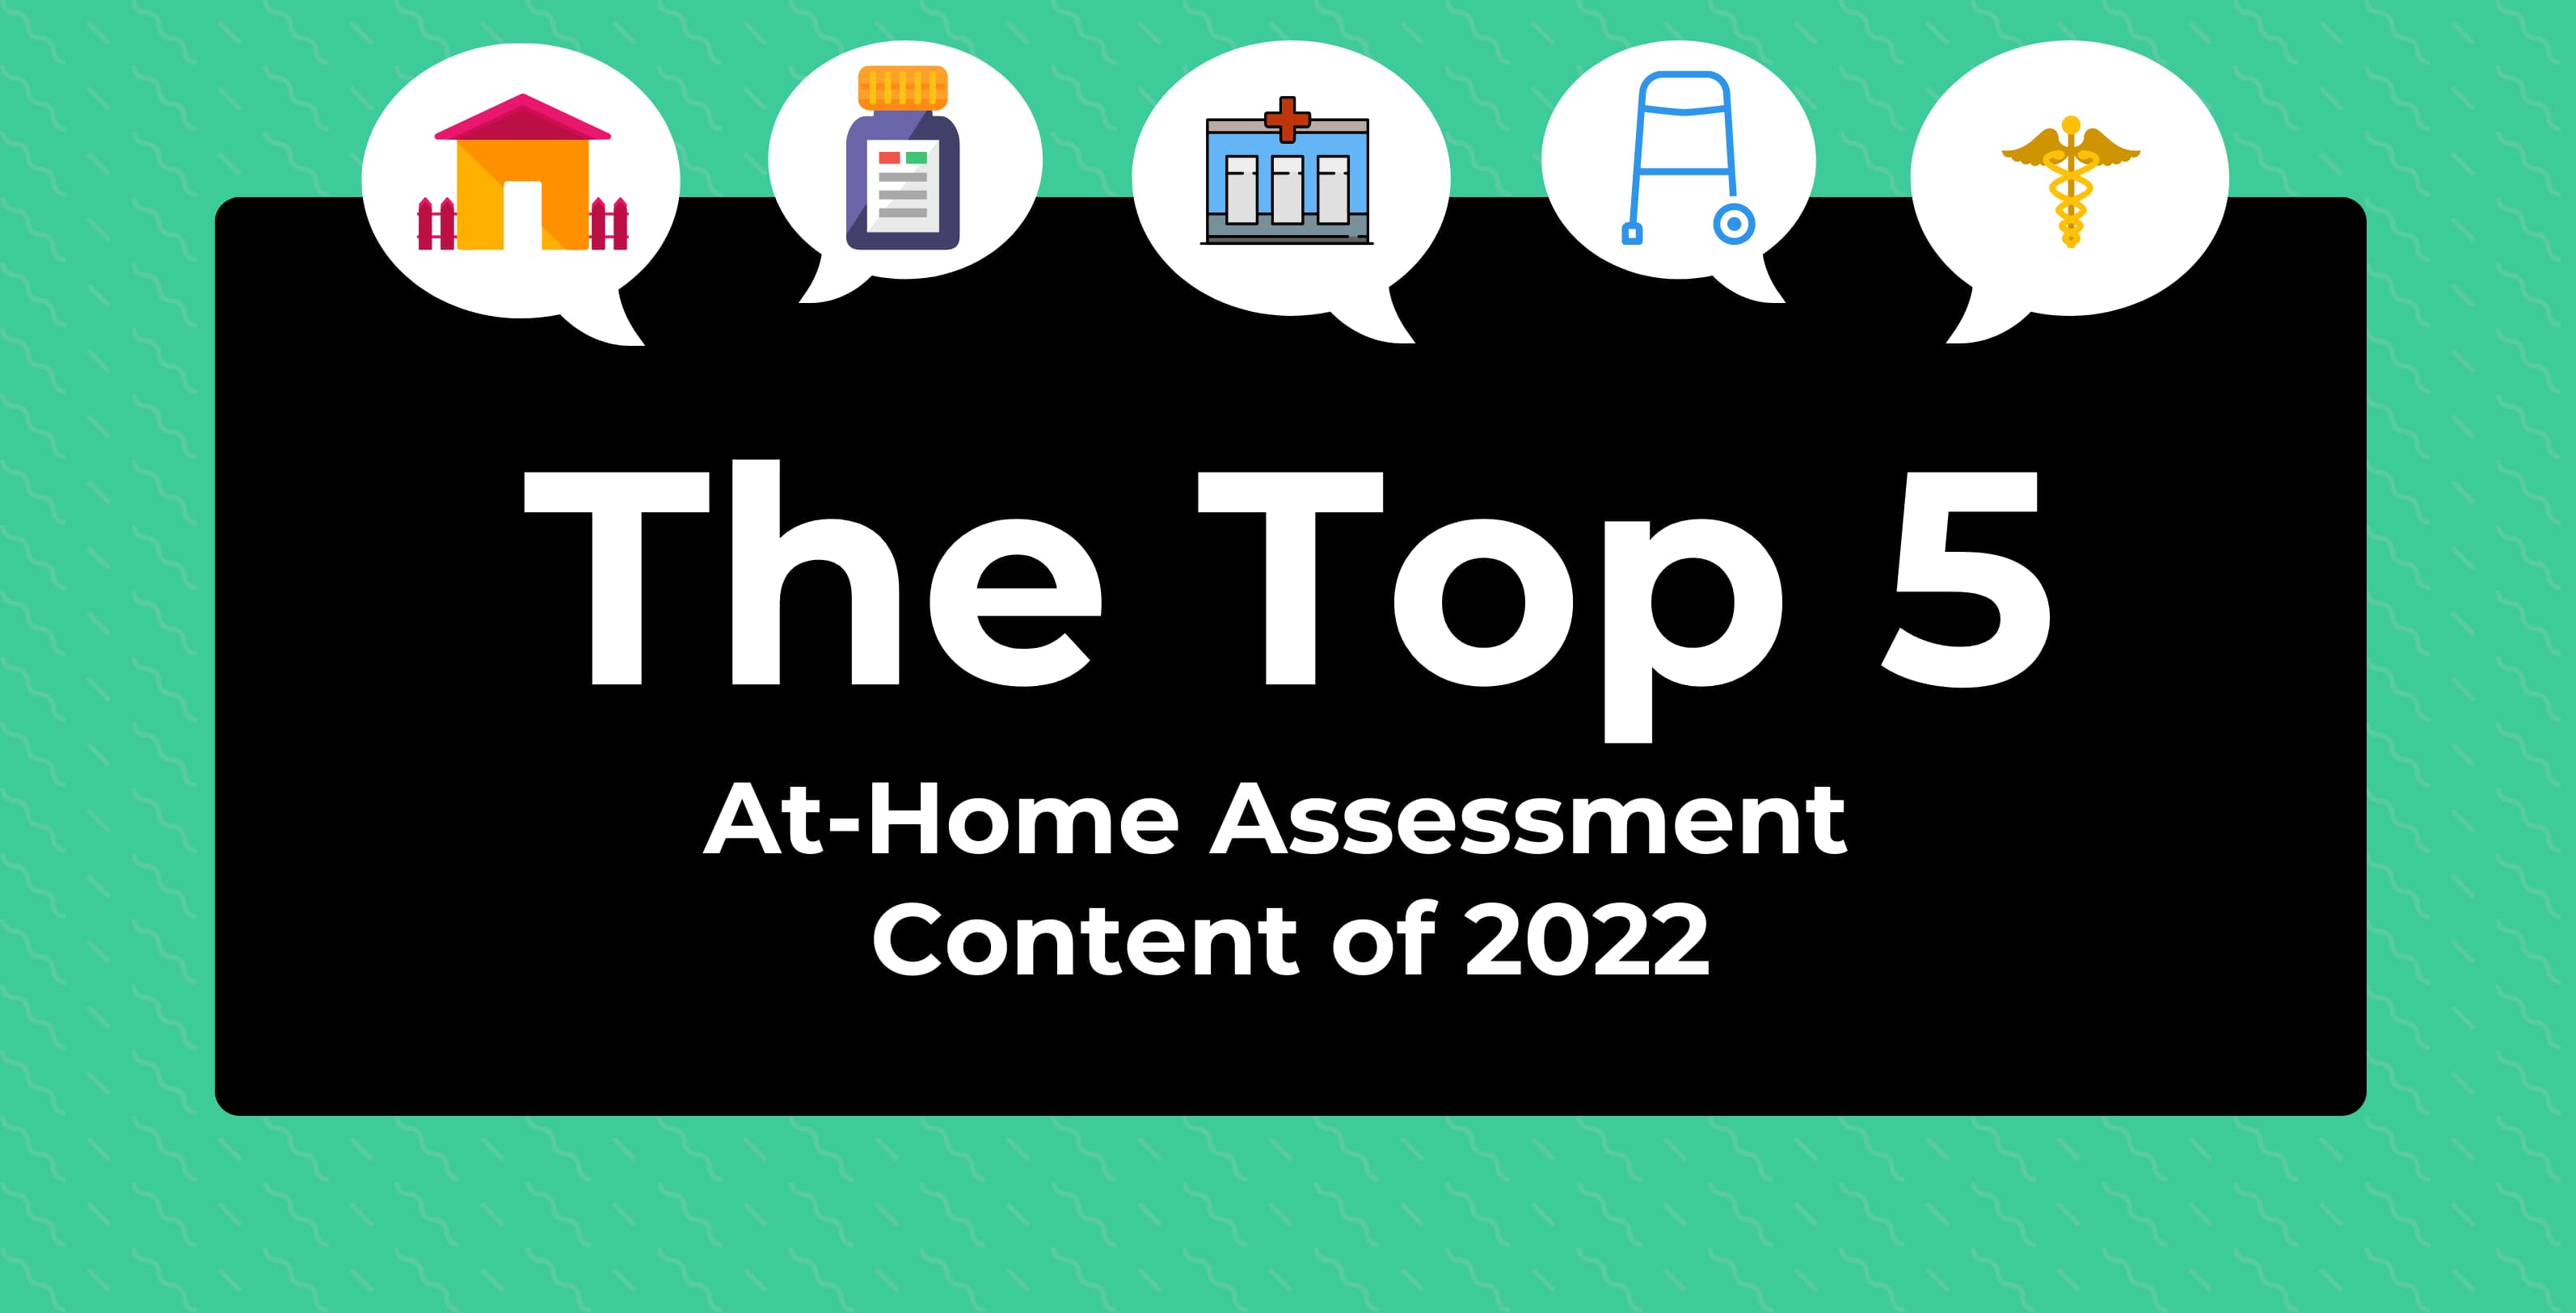 Top 5 At-Home Assessment Content of 2022